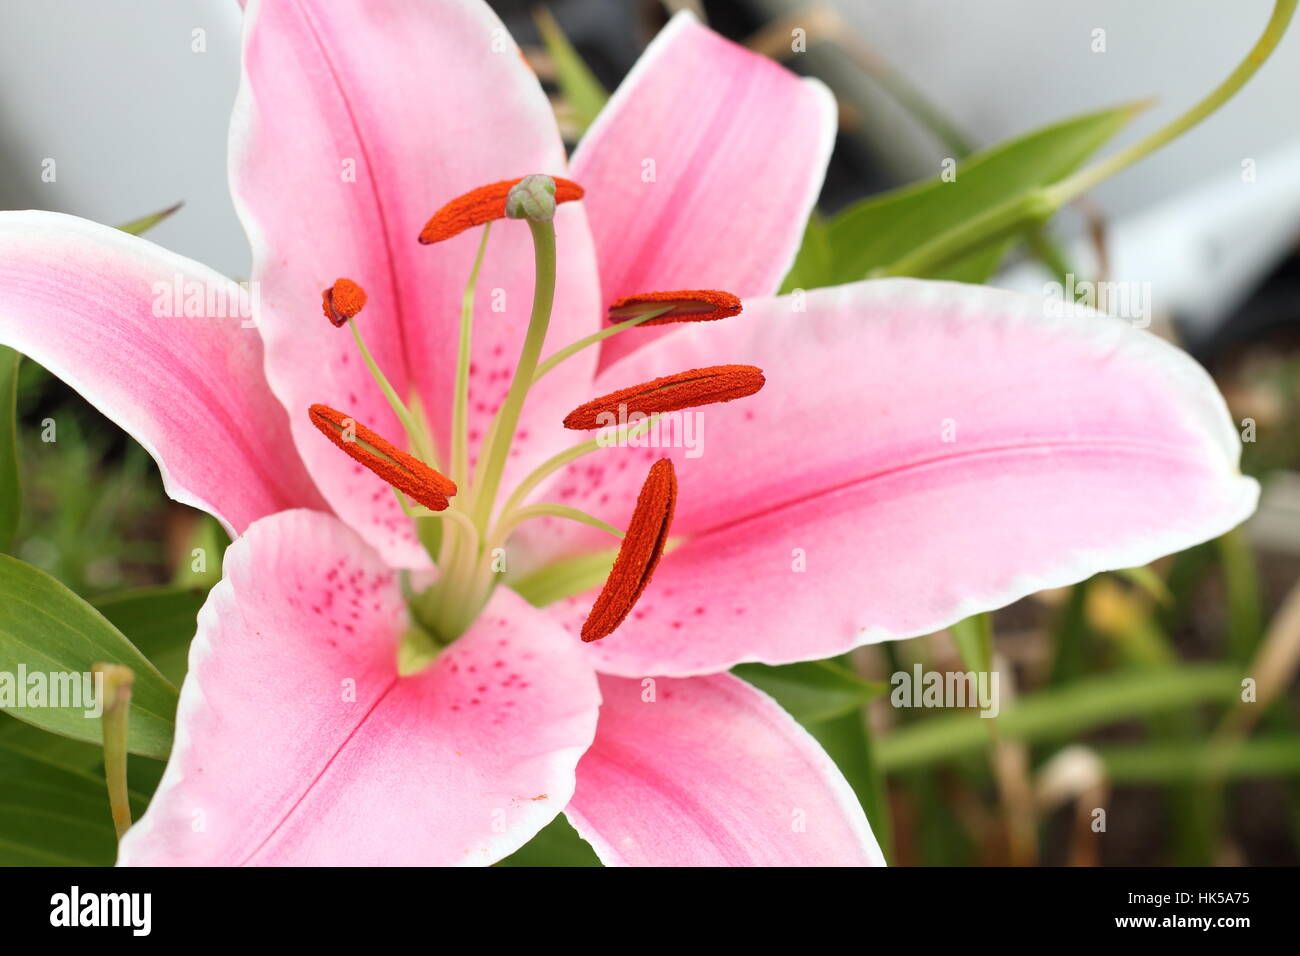 Close up of Blooming Lilium or Lilies Stock Photo